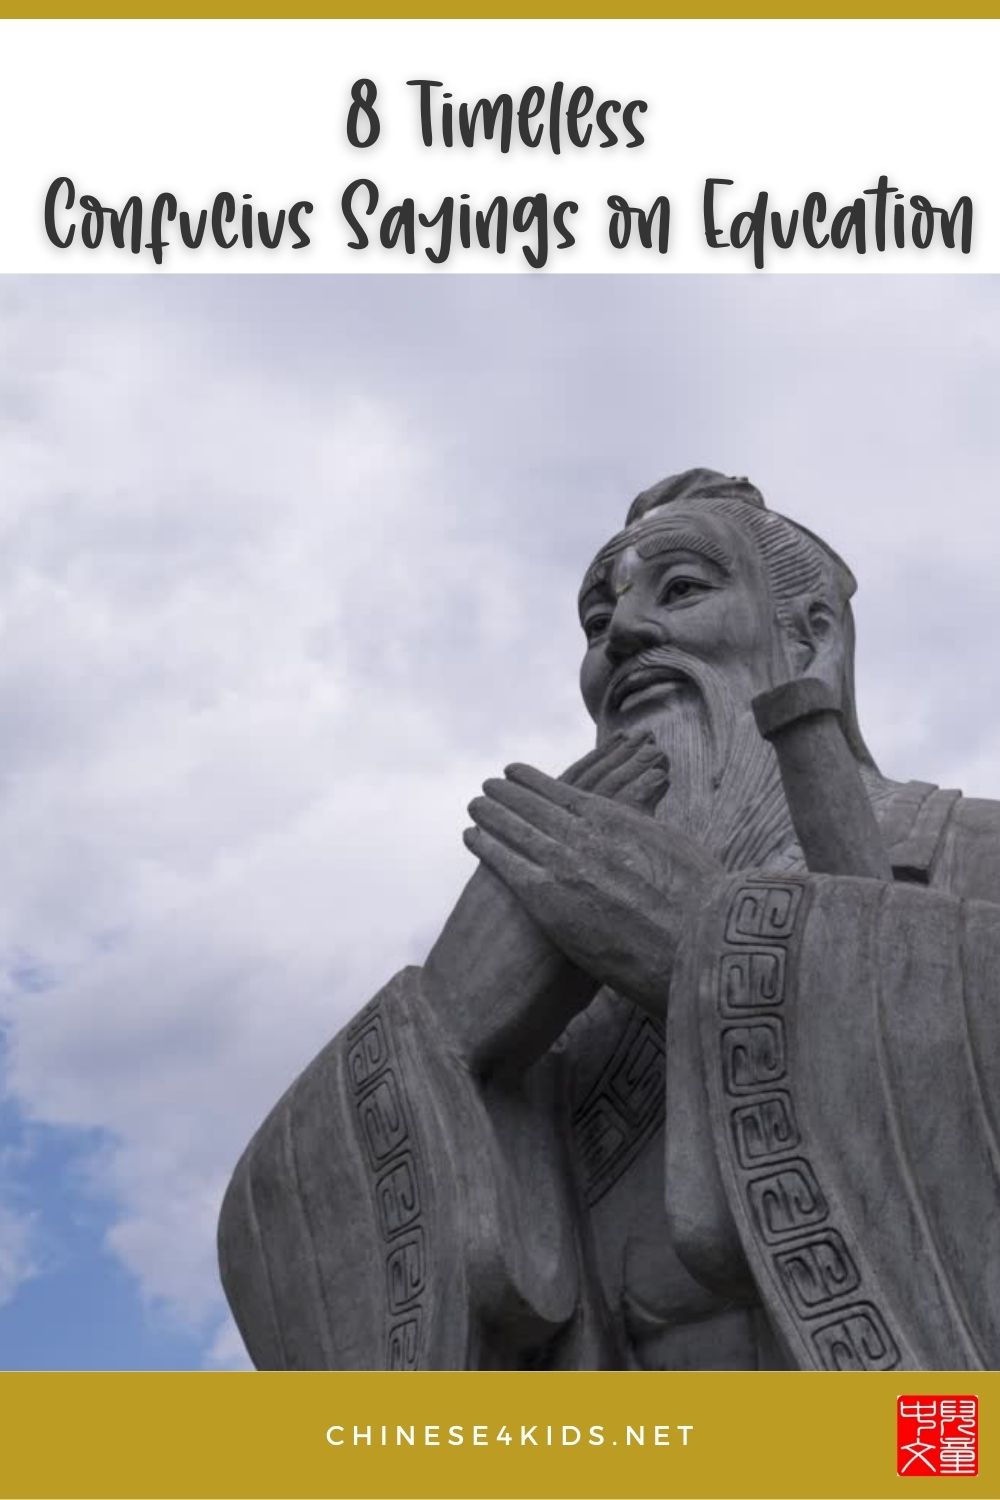 8 timeless Confucius Sayings on Education #Chinesequotes #Confucius #Chinesewisdom #Chineseculture #Chinesesaying #educationquotes